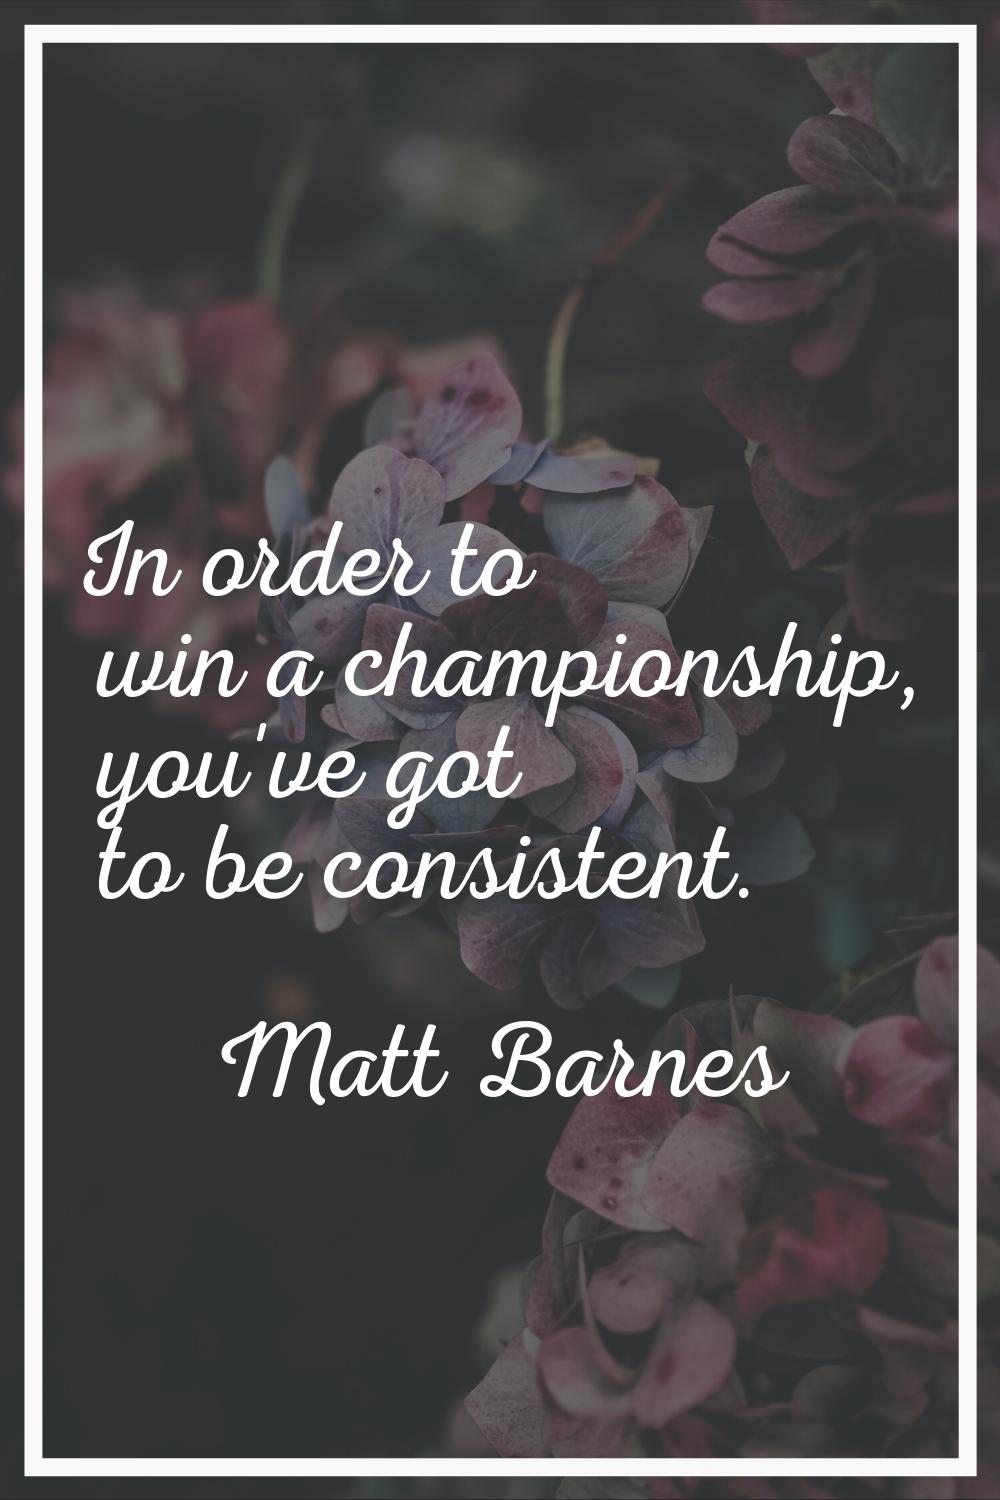 In order to win a championship, you've got to be consistent.